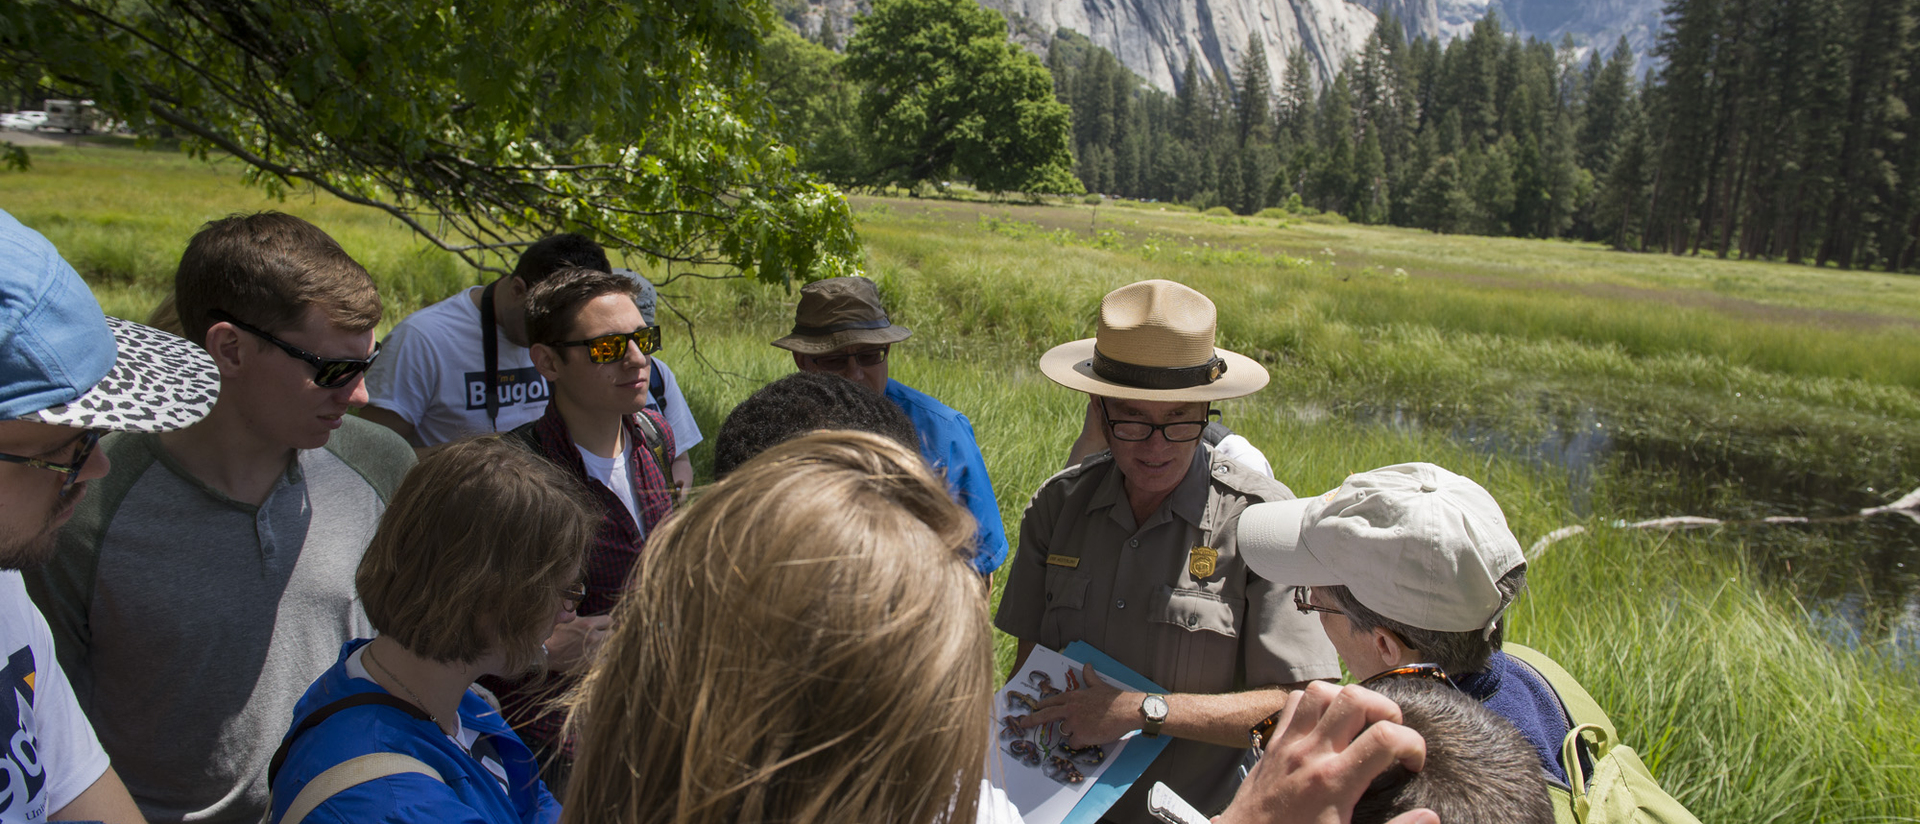 Students learning from an expert at Yosemite